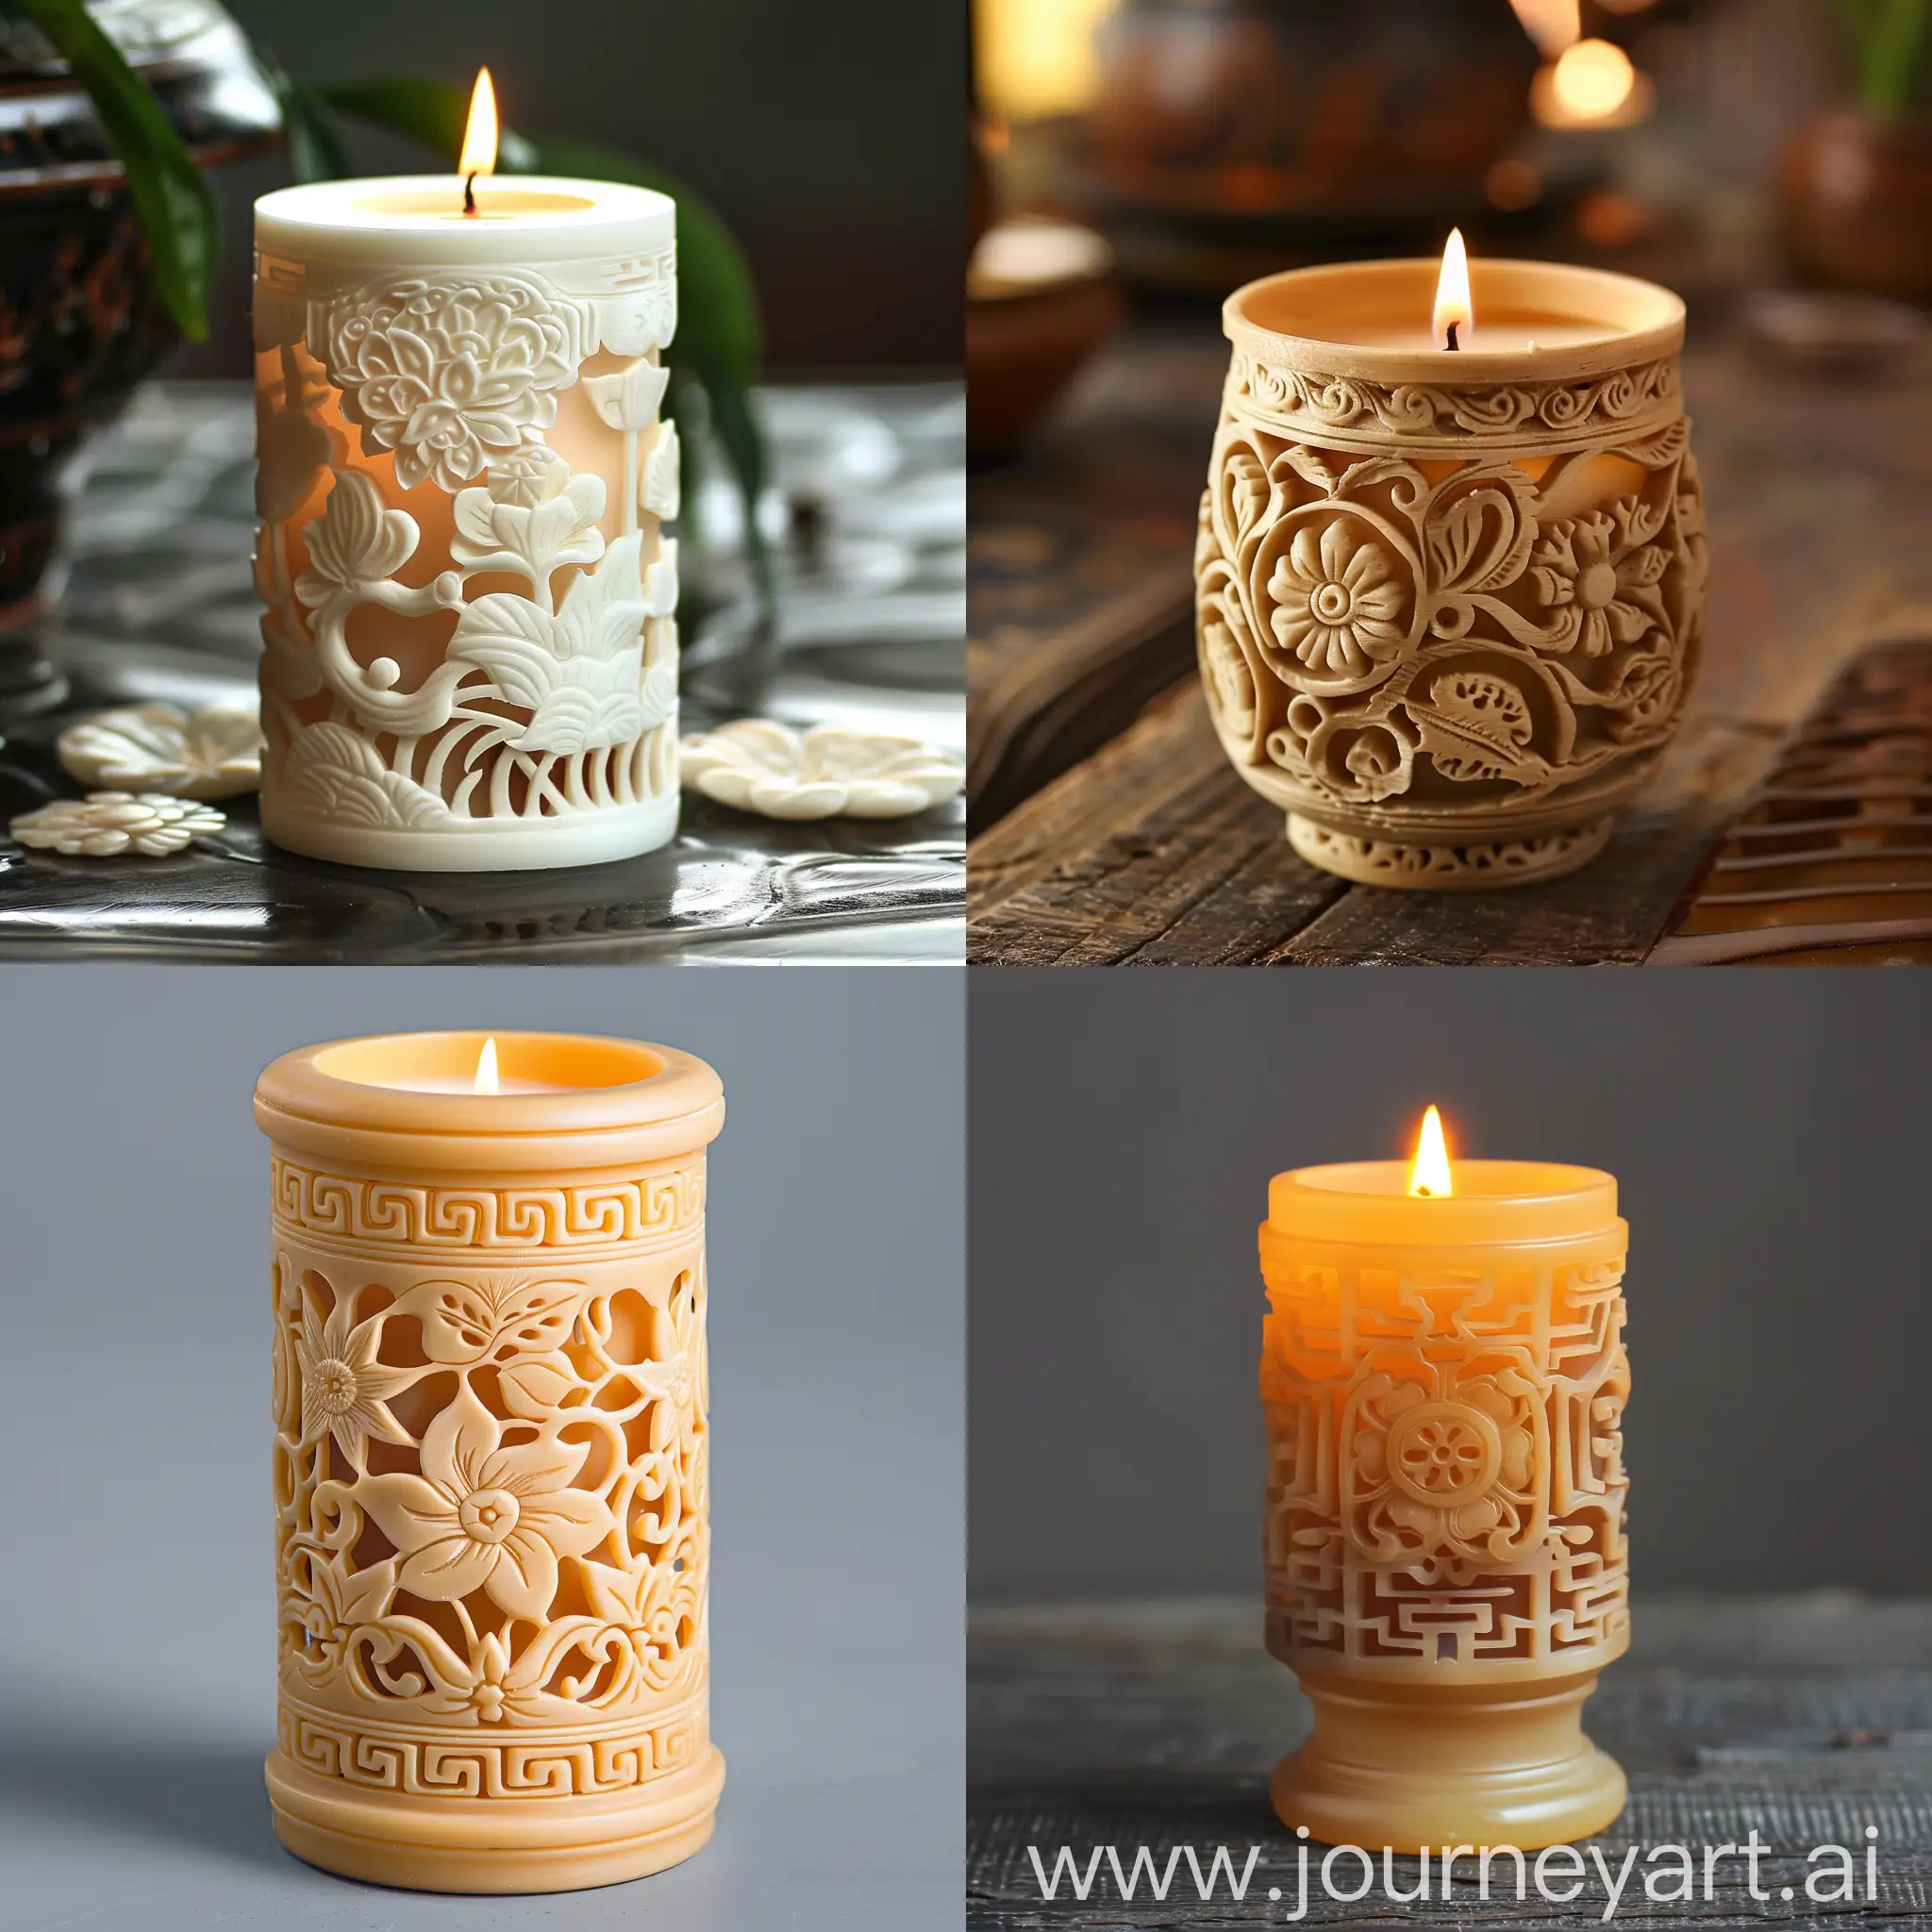 Exquisite-Traditional-Chinese-HollowOut-Carved-Candle-with-Intricate-Patterns